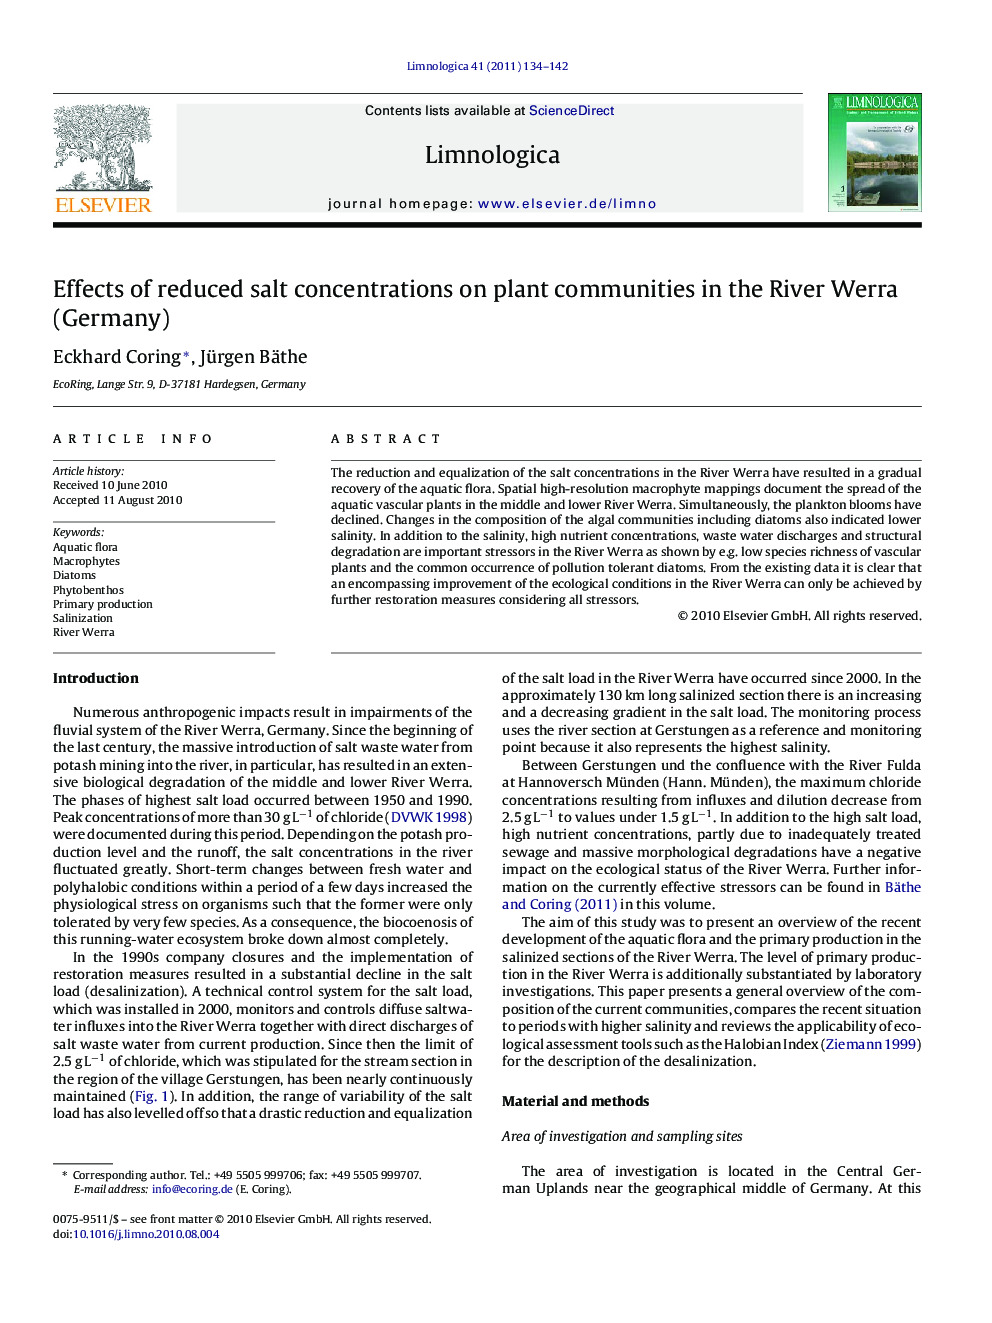 Effects of reduced salt concentrations on plant communities in the River Werra (Germany)